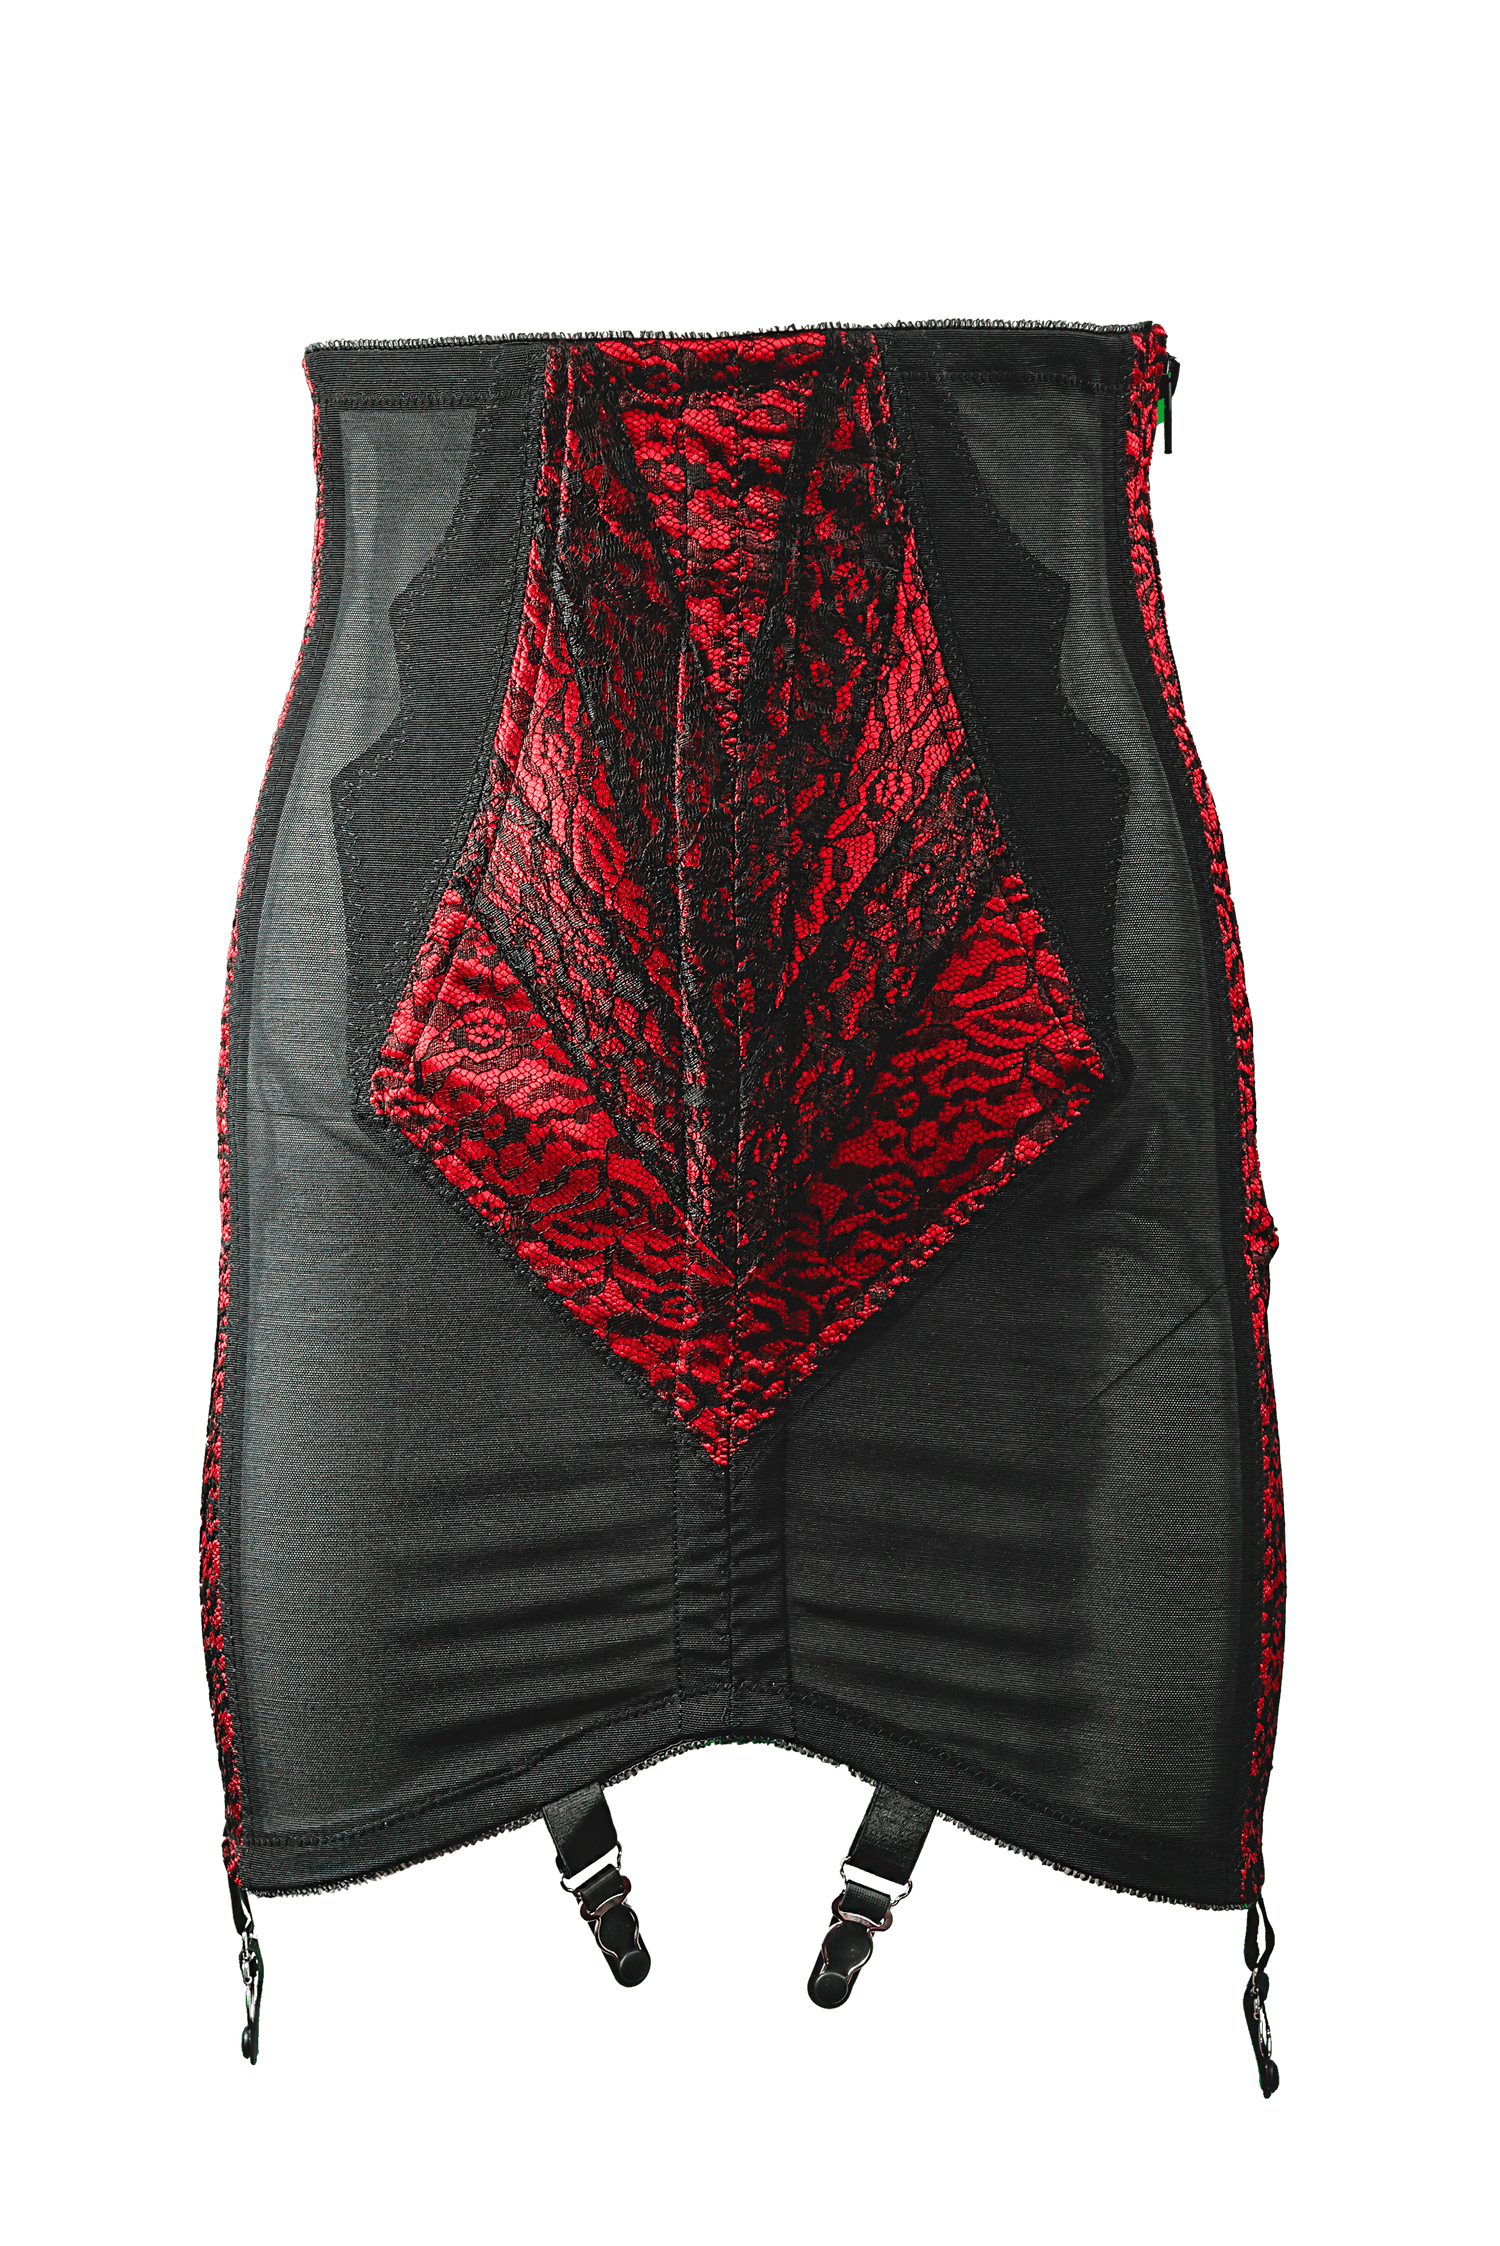 Rago Shapewear Open Bottom Black with Red Detailing Body Briefer Size 38C